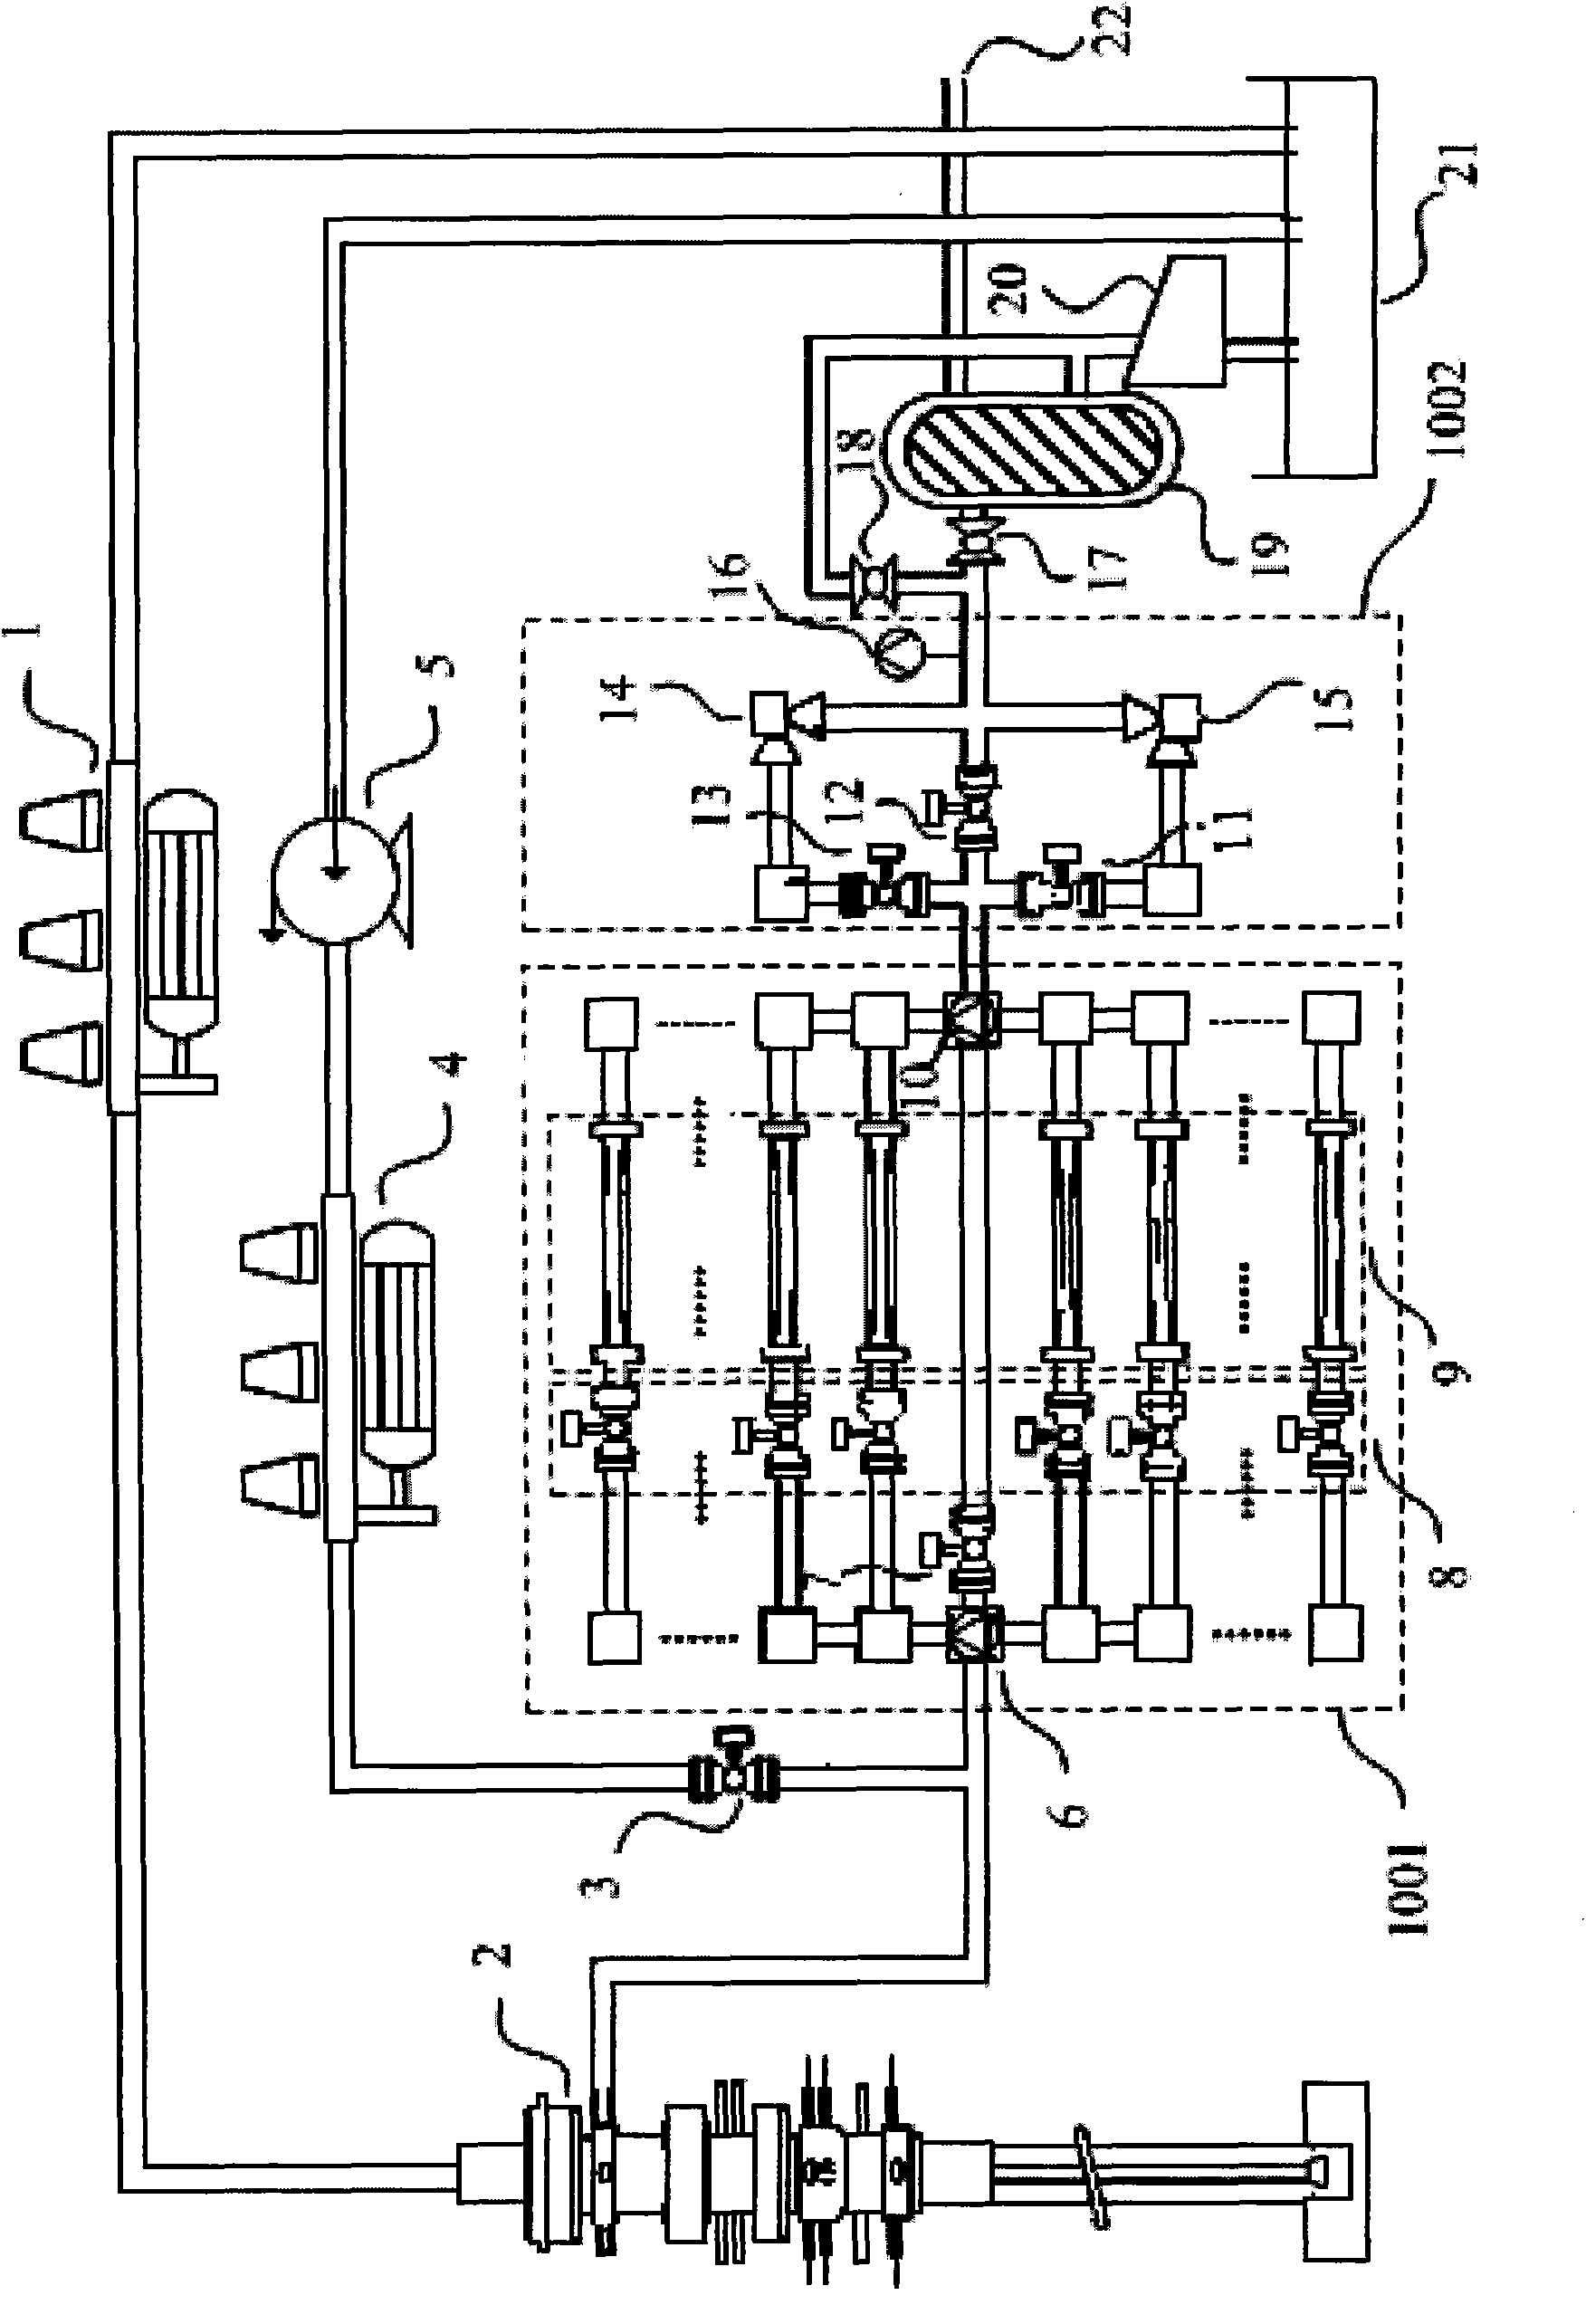 Combined multi-stage pressure control method and device